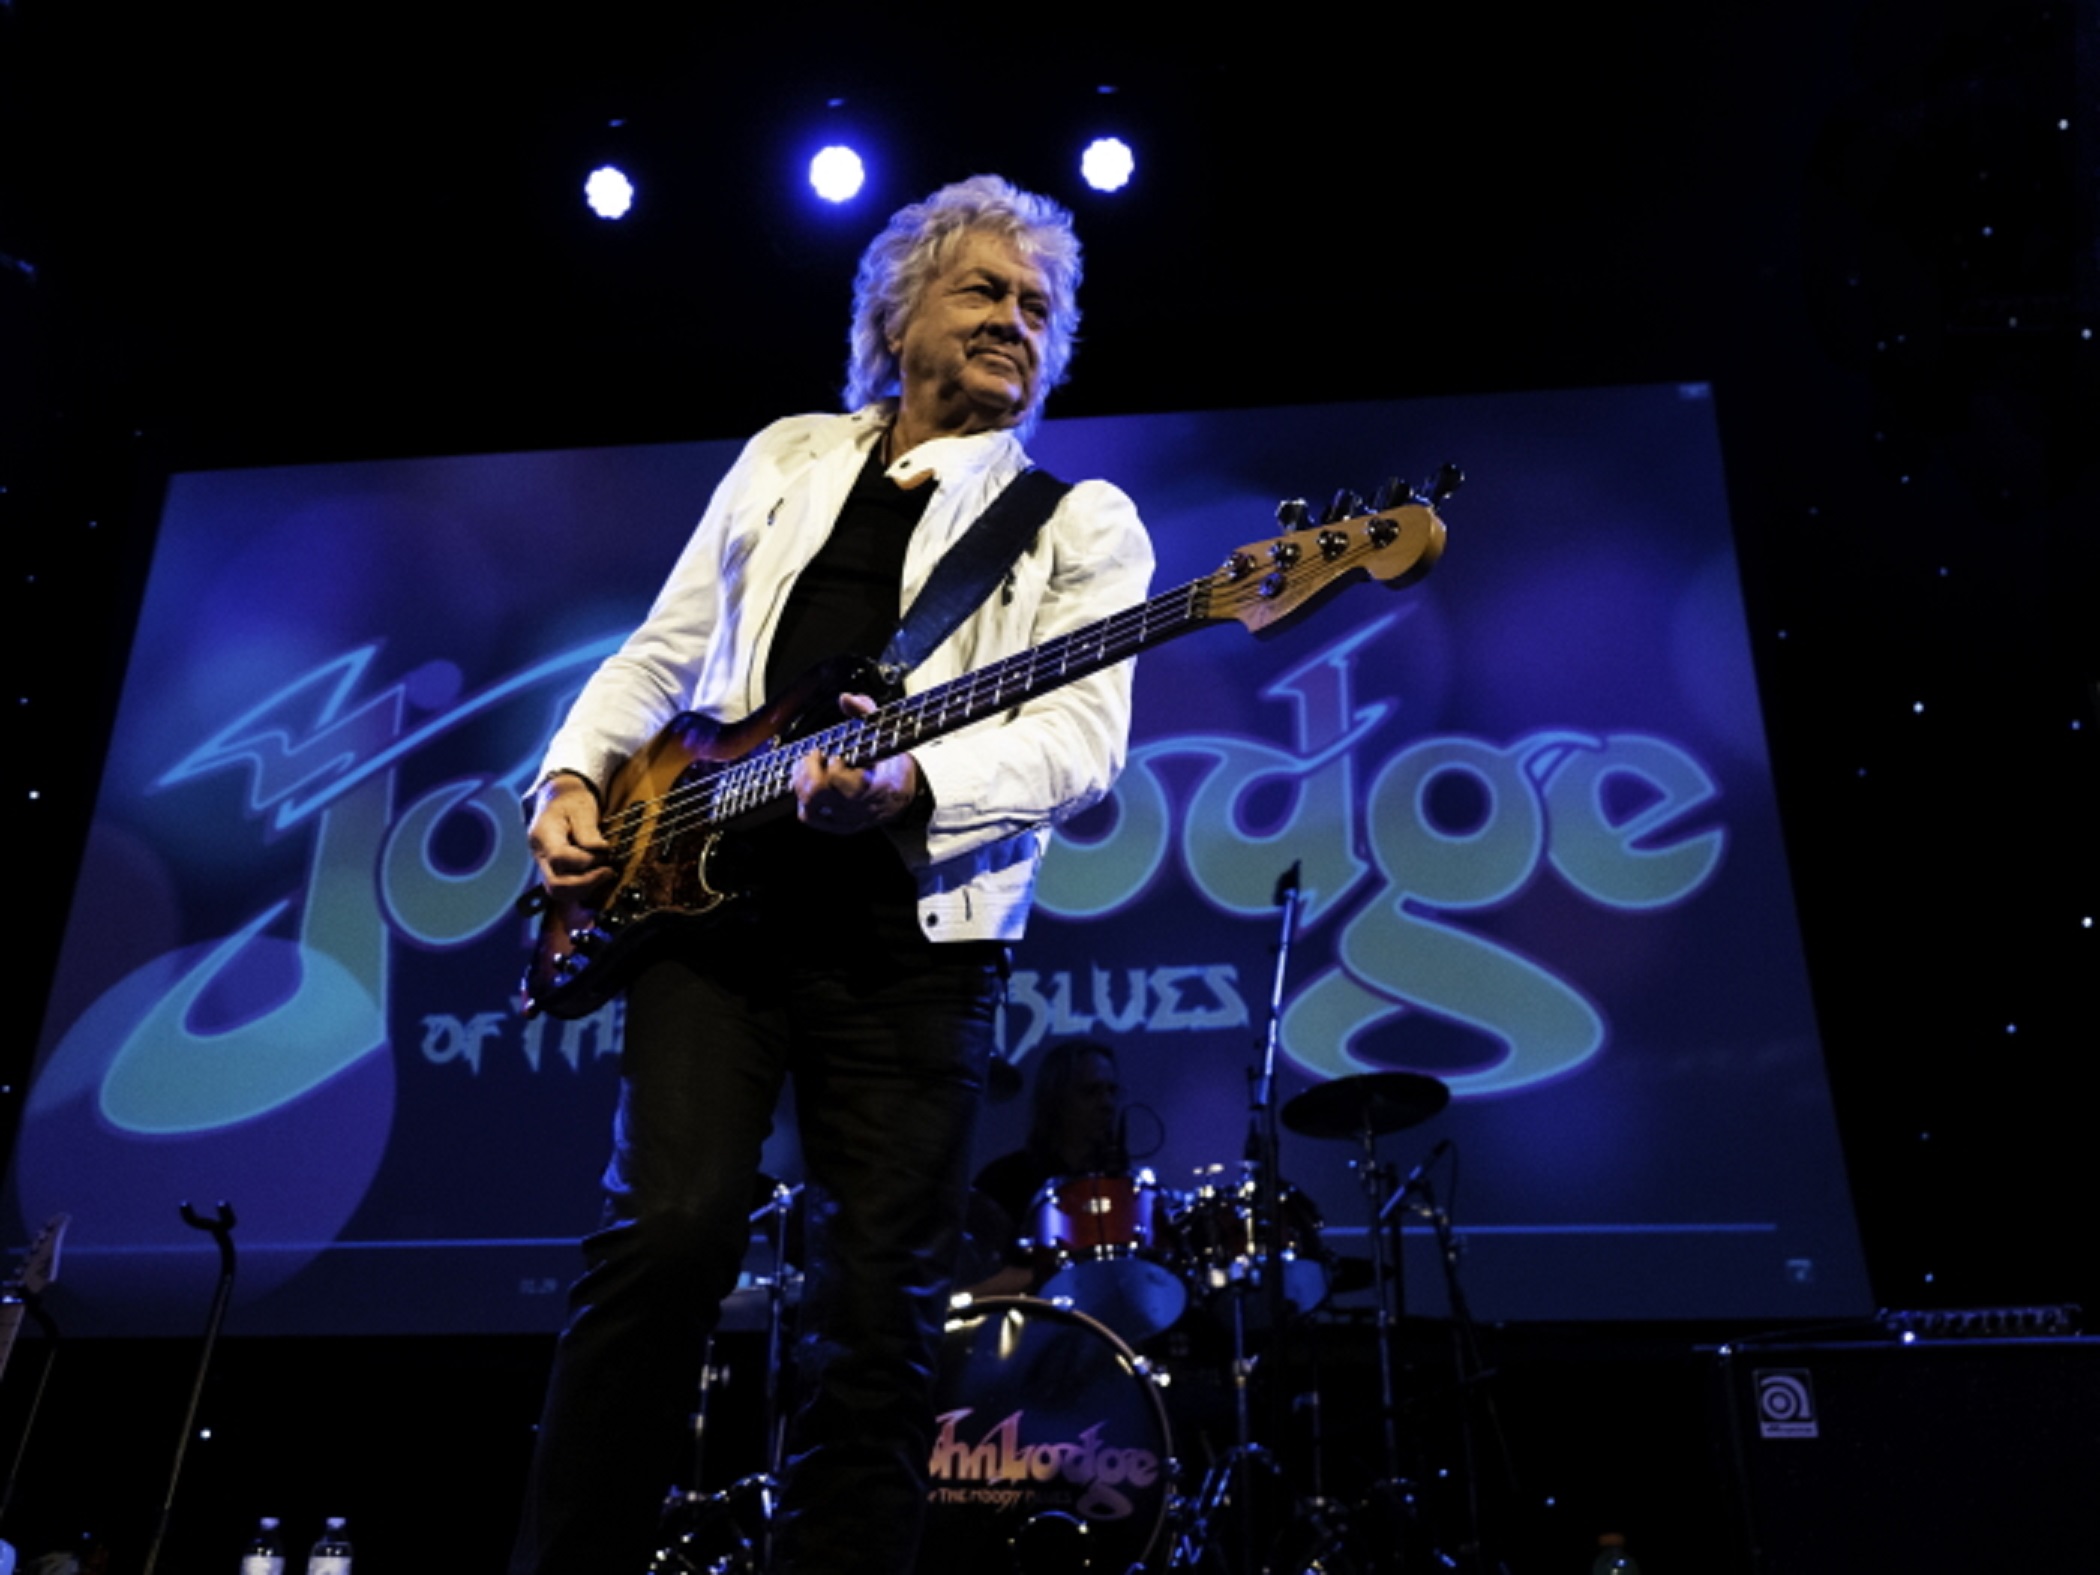 THE MOODY BLUES’ JOHN LODGE ONE NIGHT ONLY! JULY 25 at OCEAN CITY MUSIC PIER, NJ